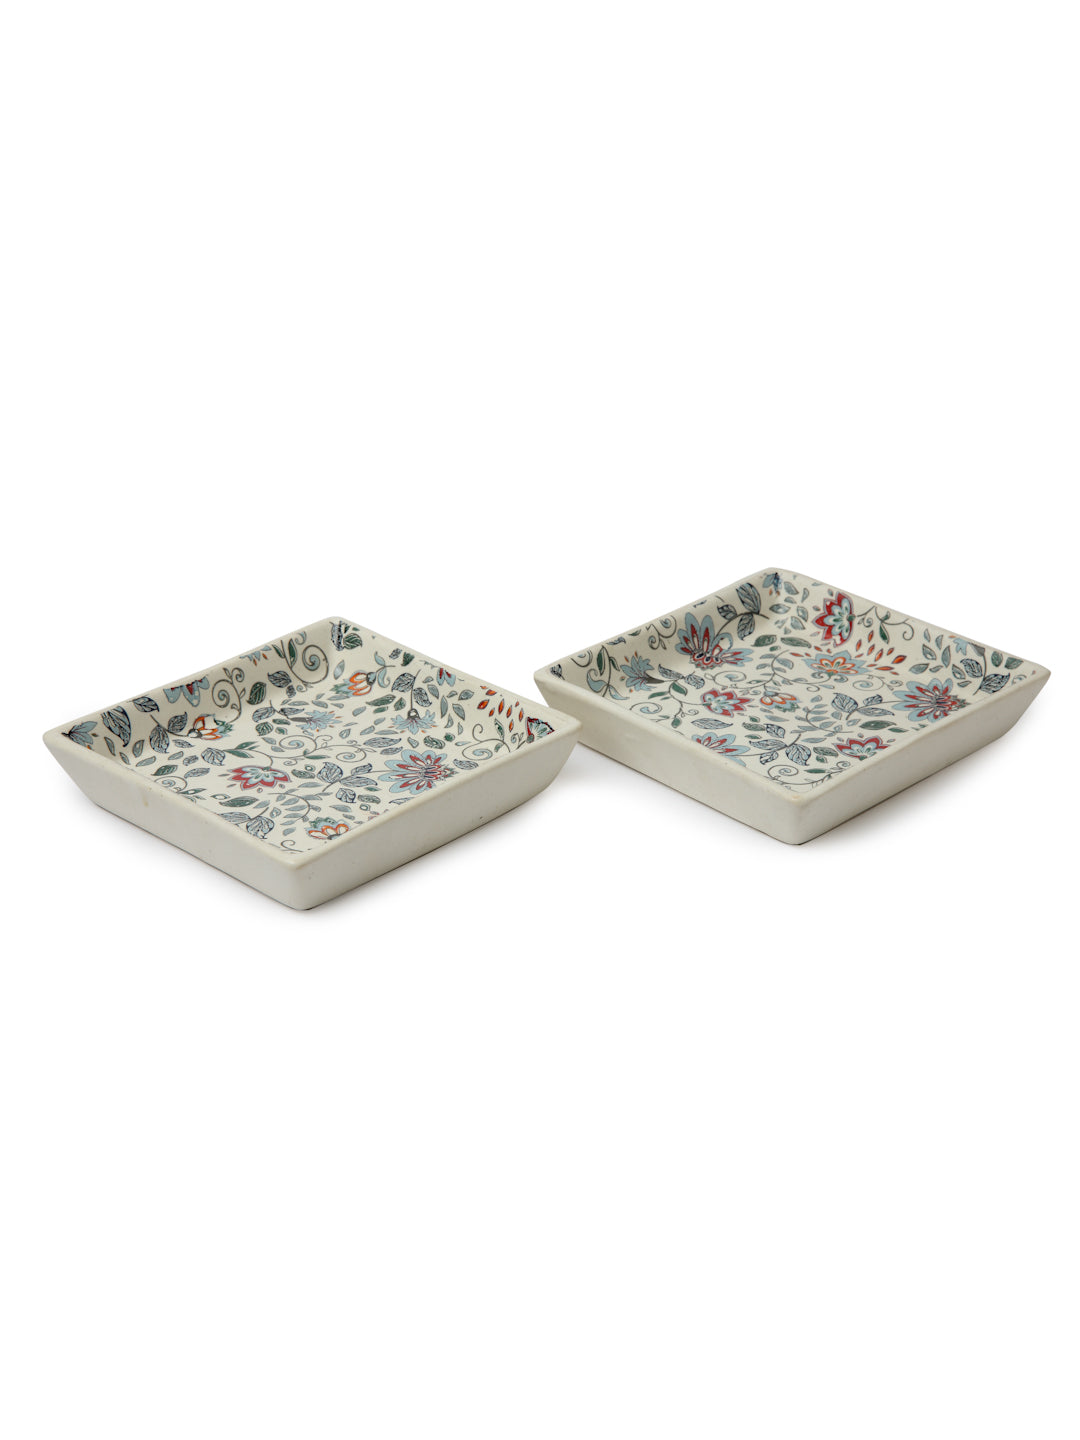 Handcrafted Stoneware Floral Set of 2 Tray